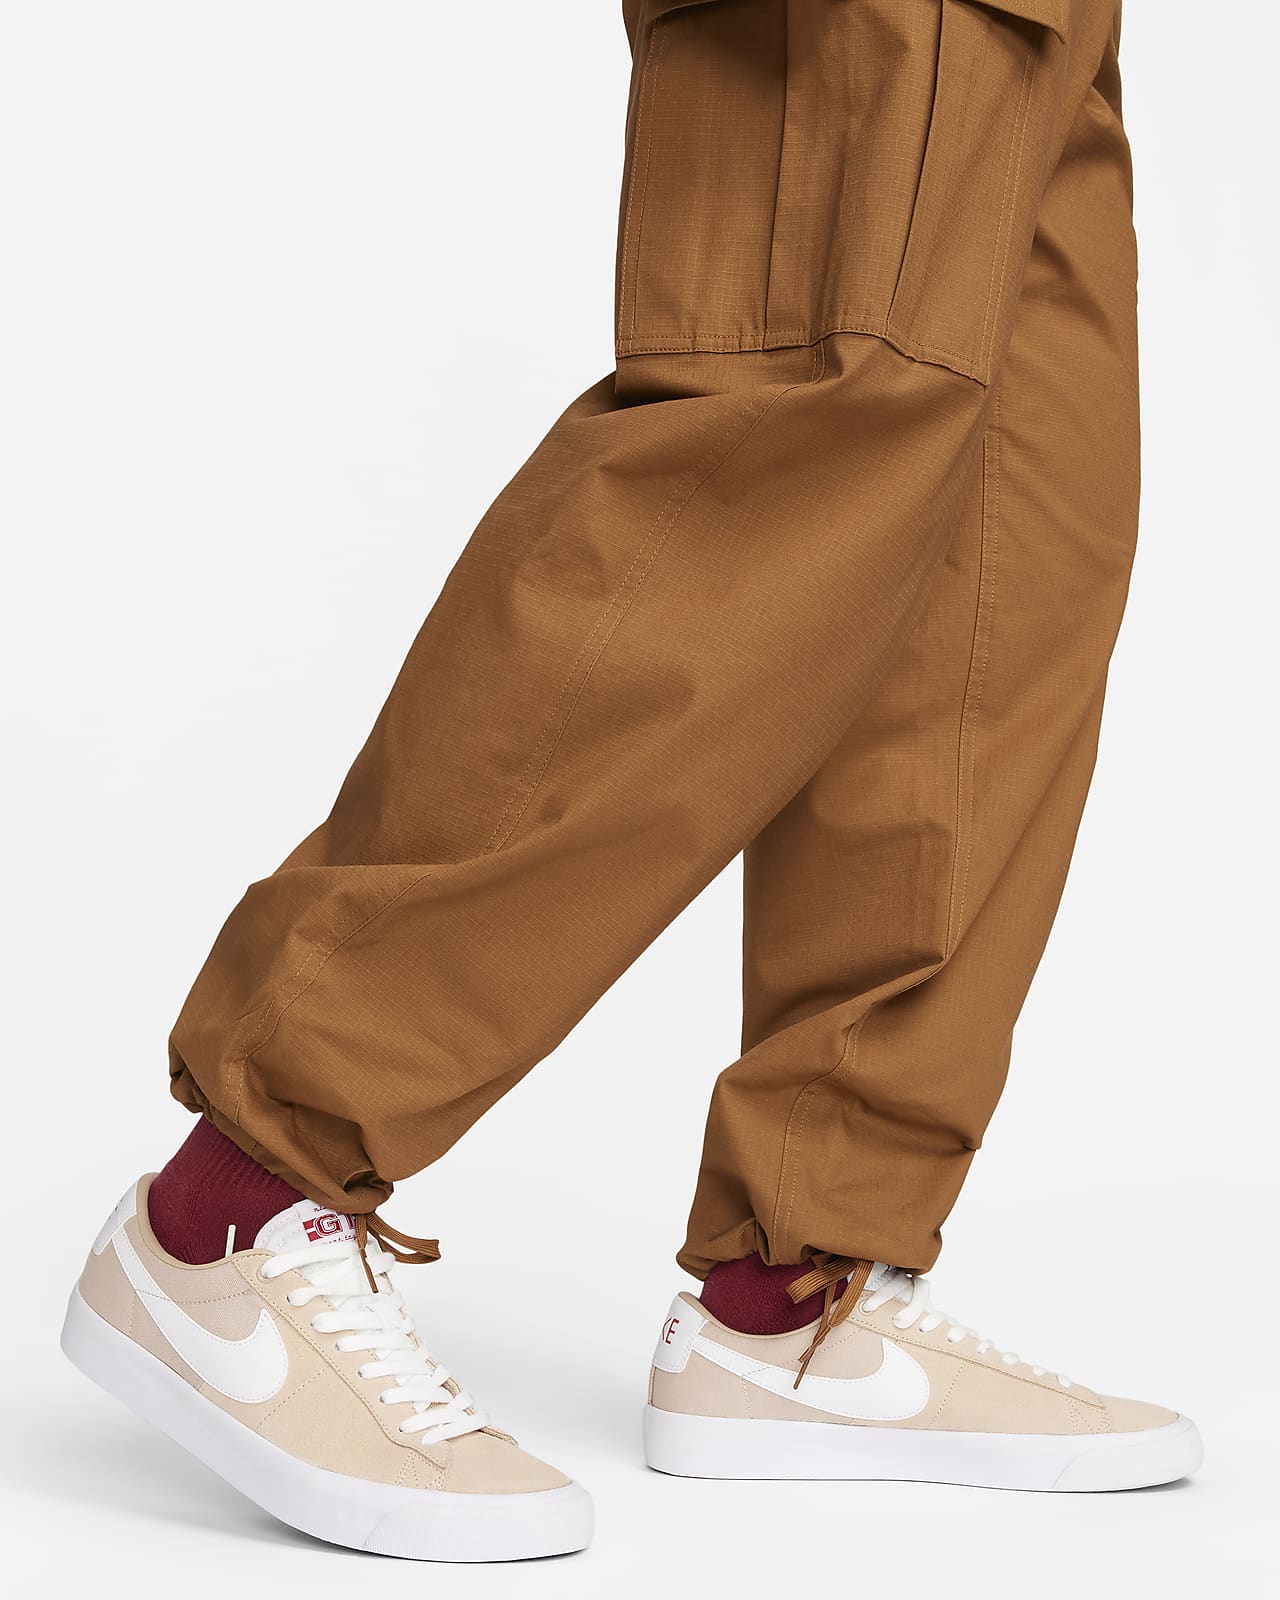 Cargo Pants for Men Solid Casual Thermal Lined Outdoor Straight Pants Multi  Pockets Work Wear Cargo Trousers - Walmart.com